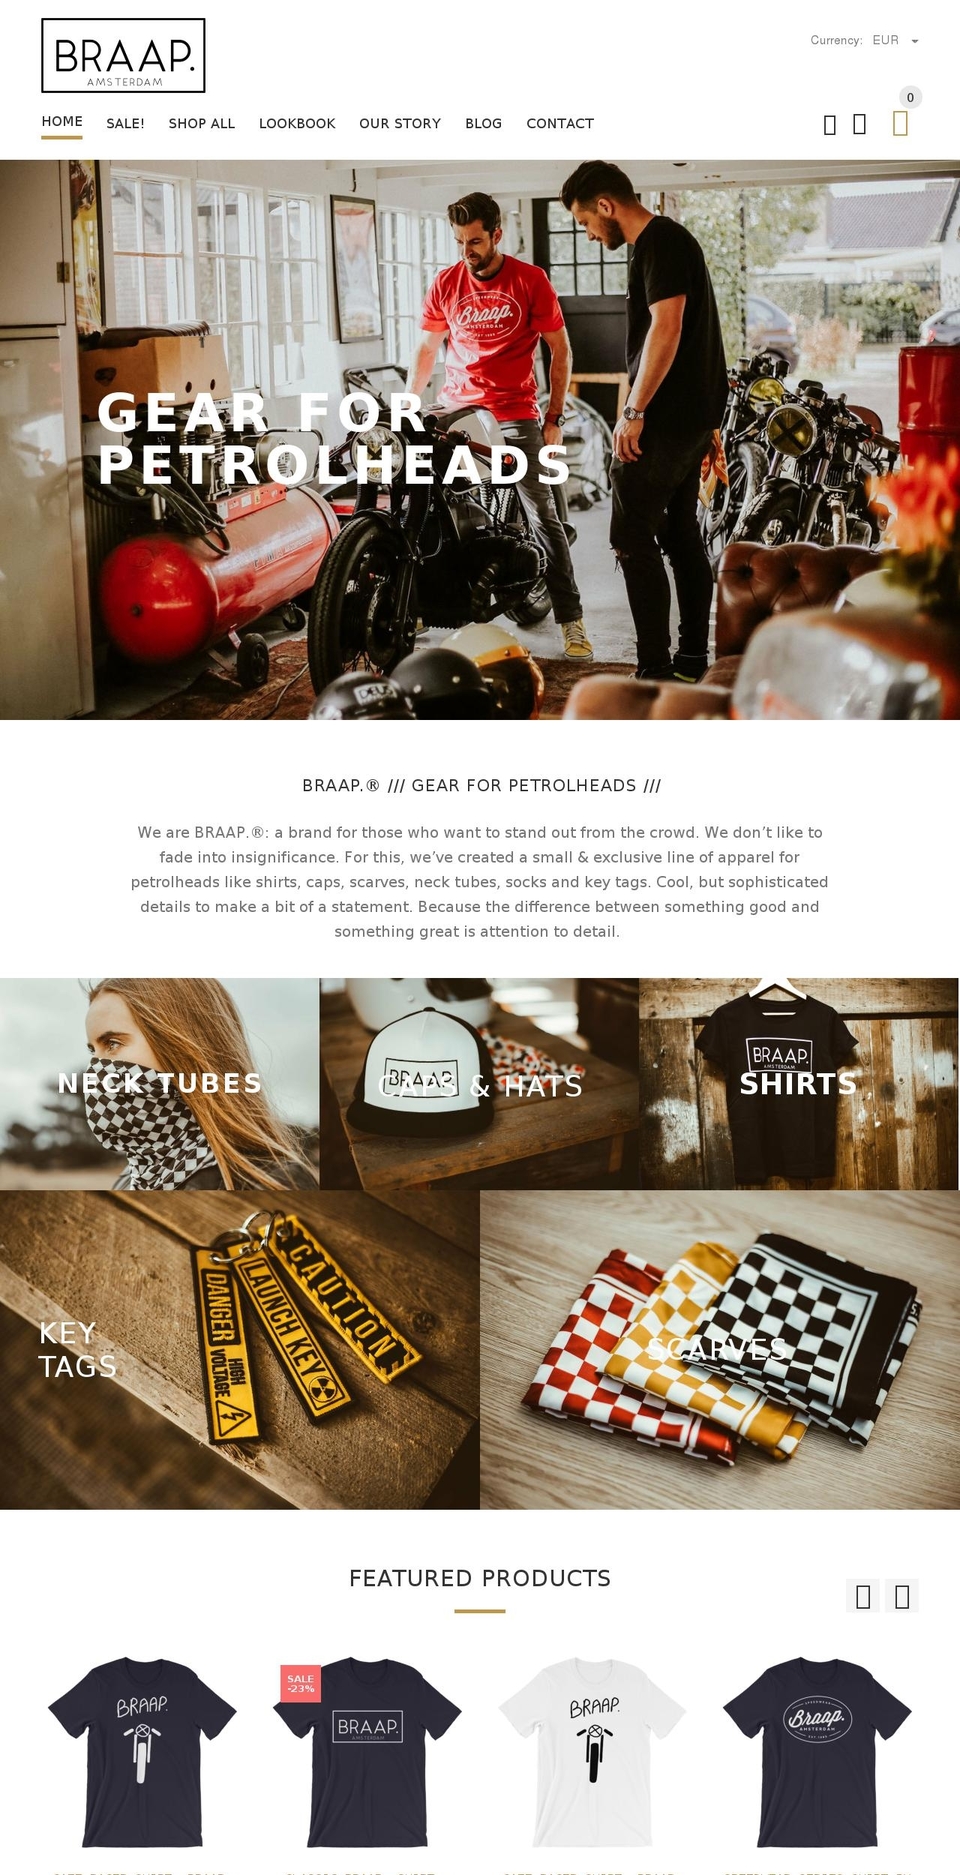 install-me-yourstore-v2-1-9 Shopify theme site example braap.cc